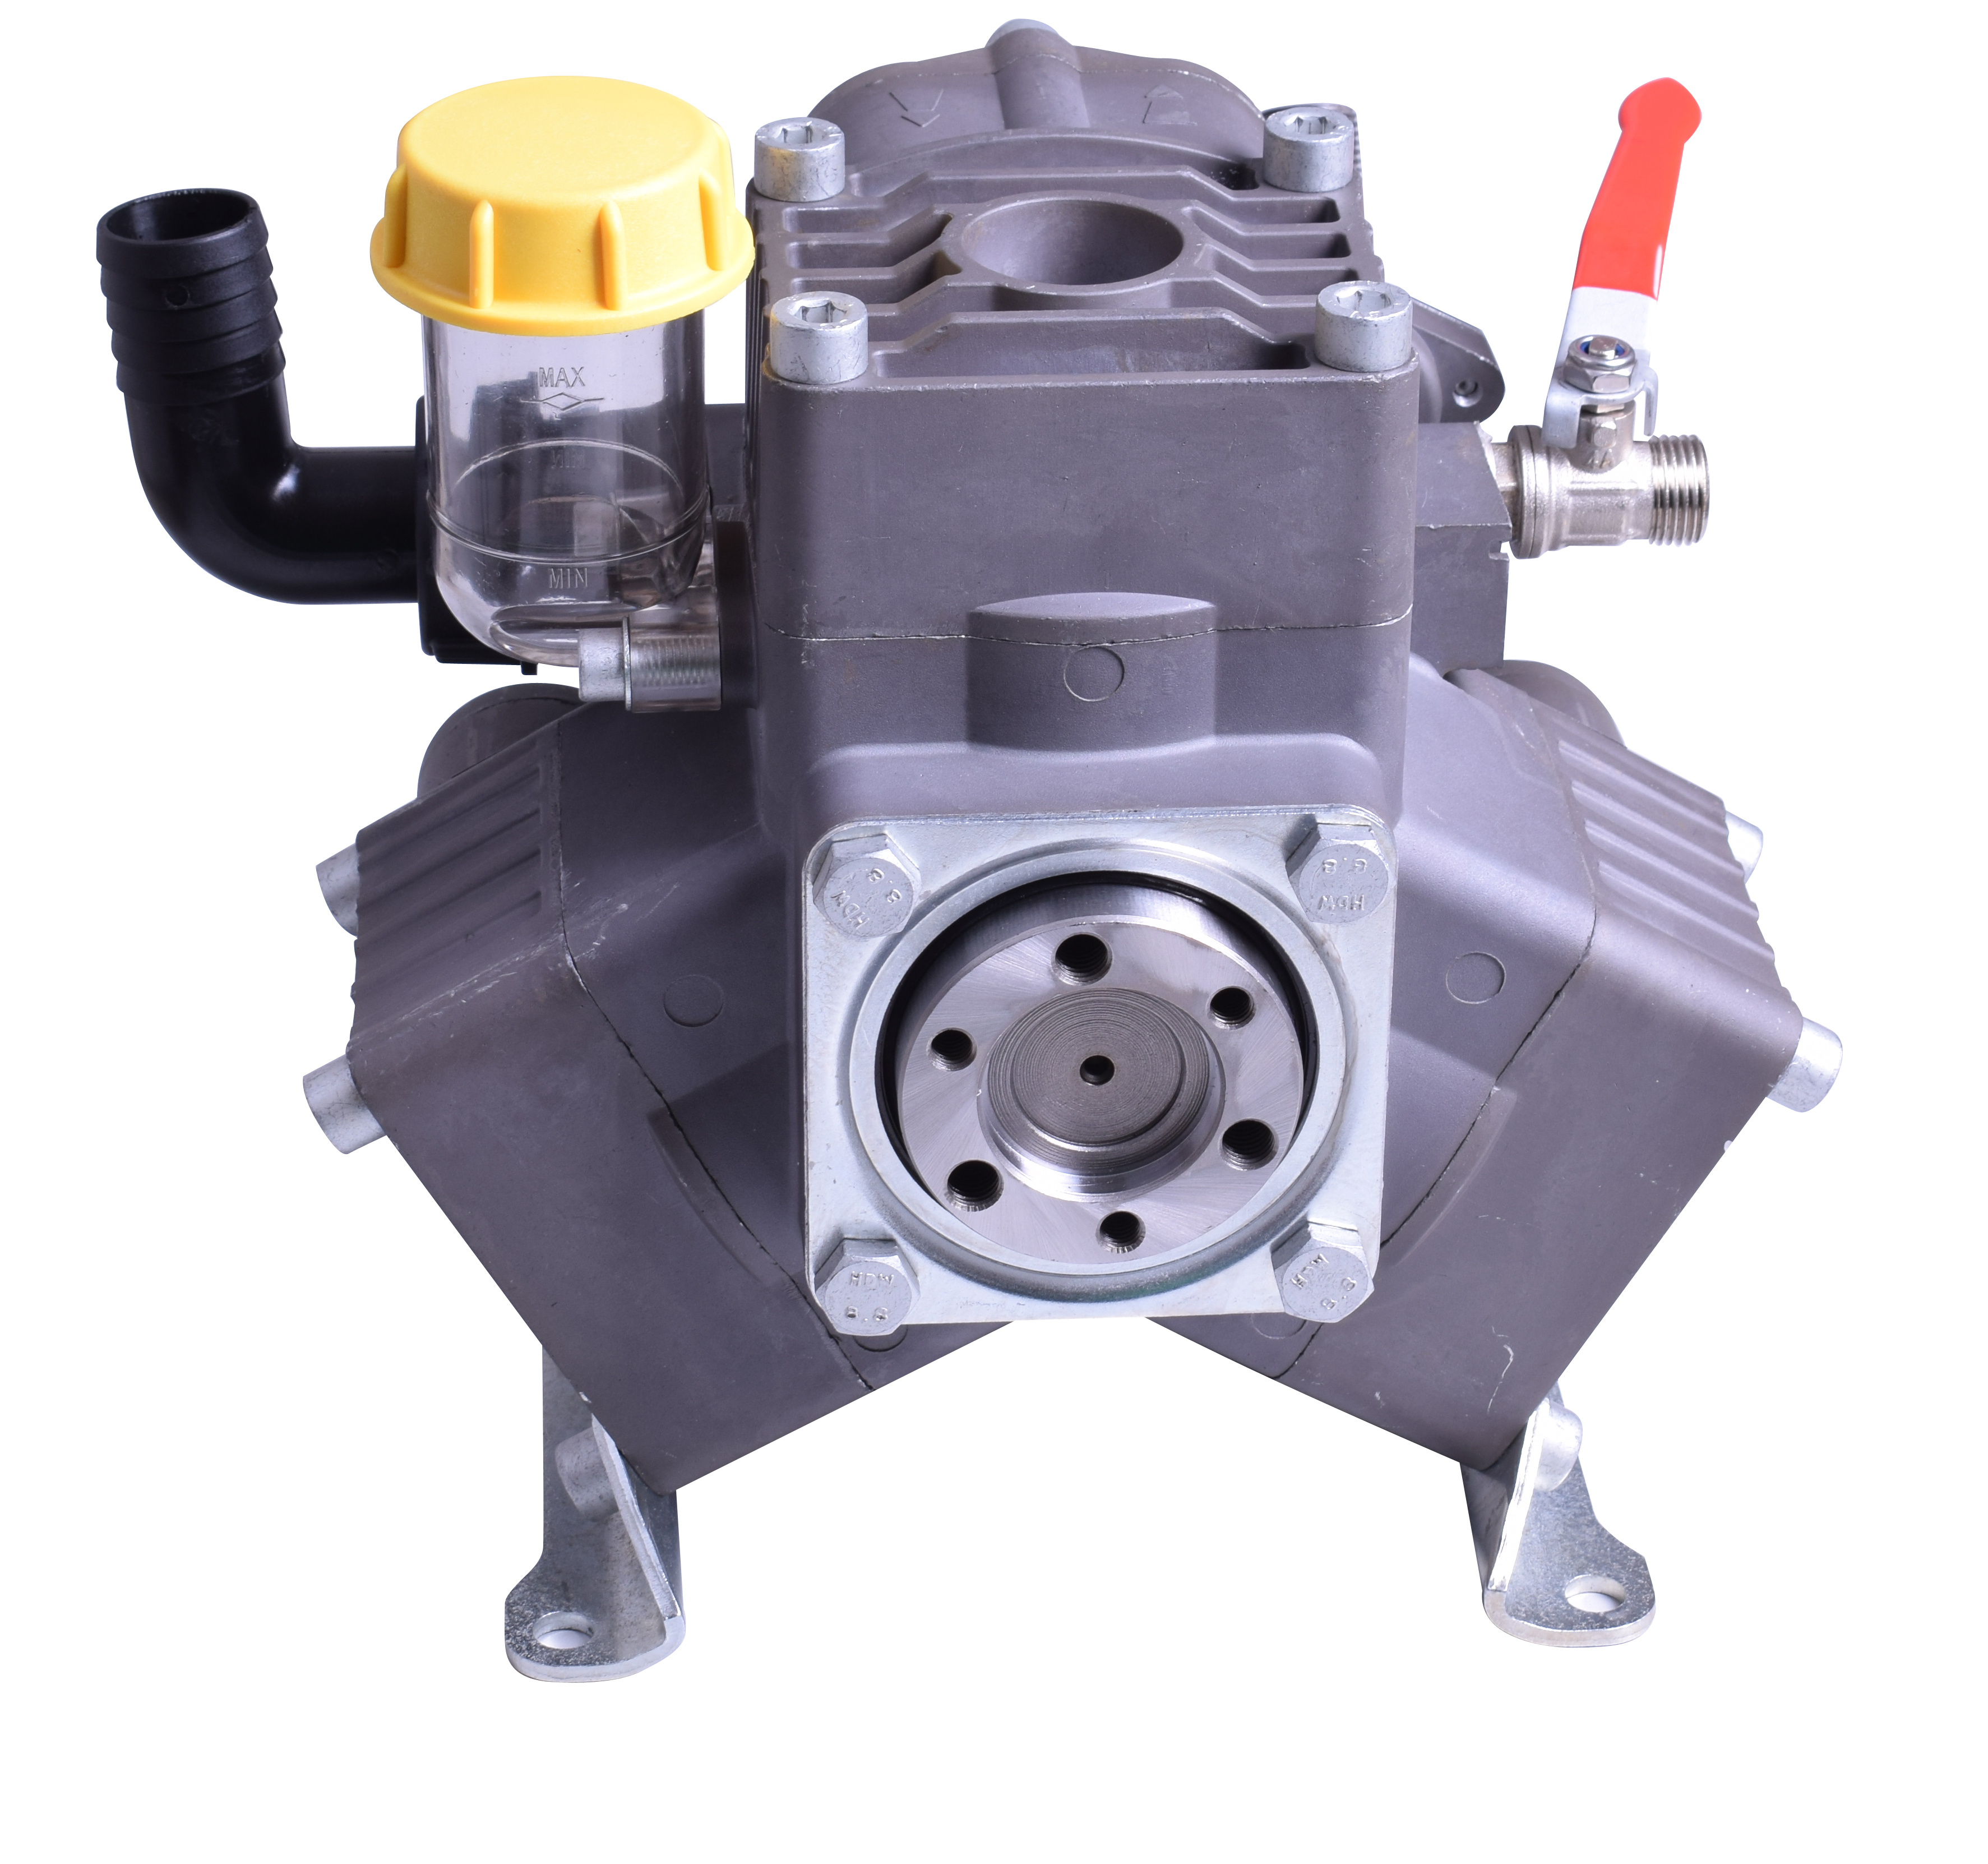 Diaphragm pump MBS54 for agricultural tractor sprayer use